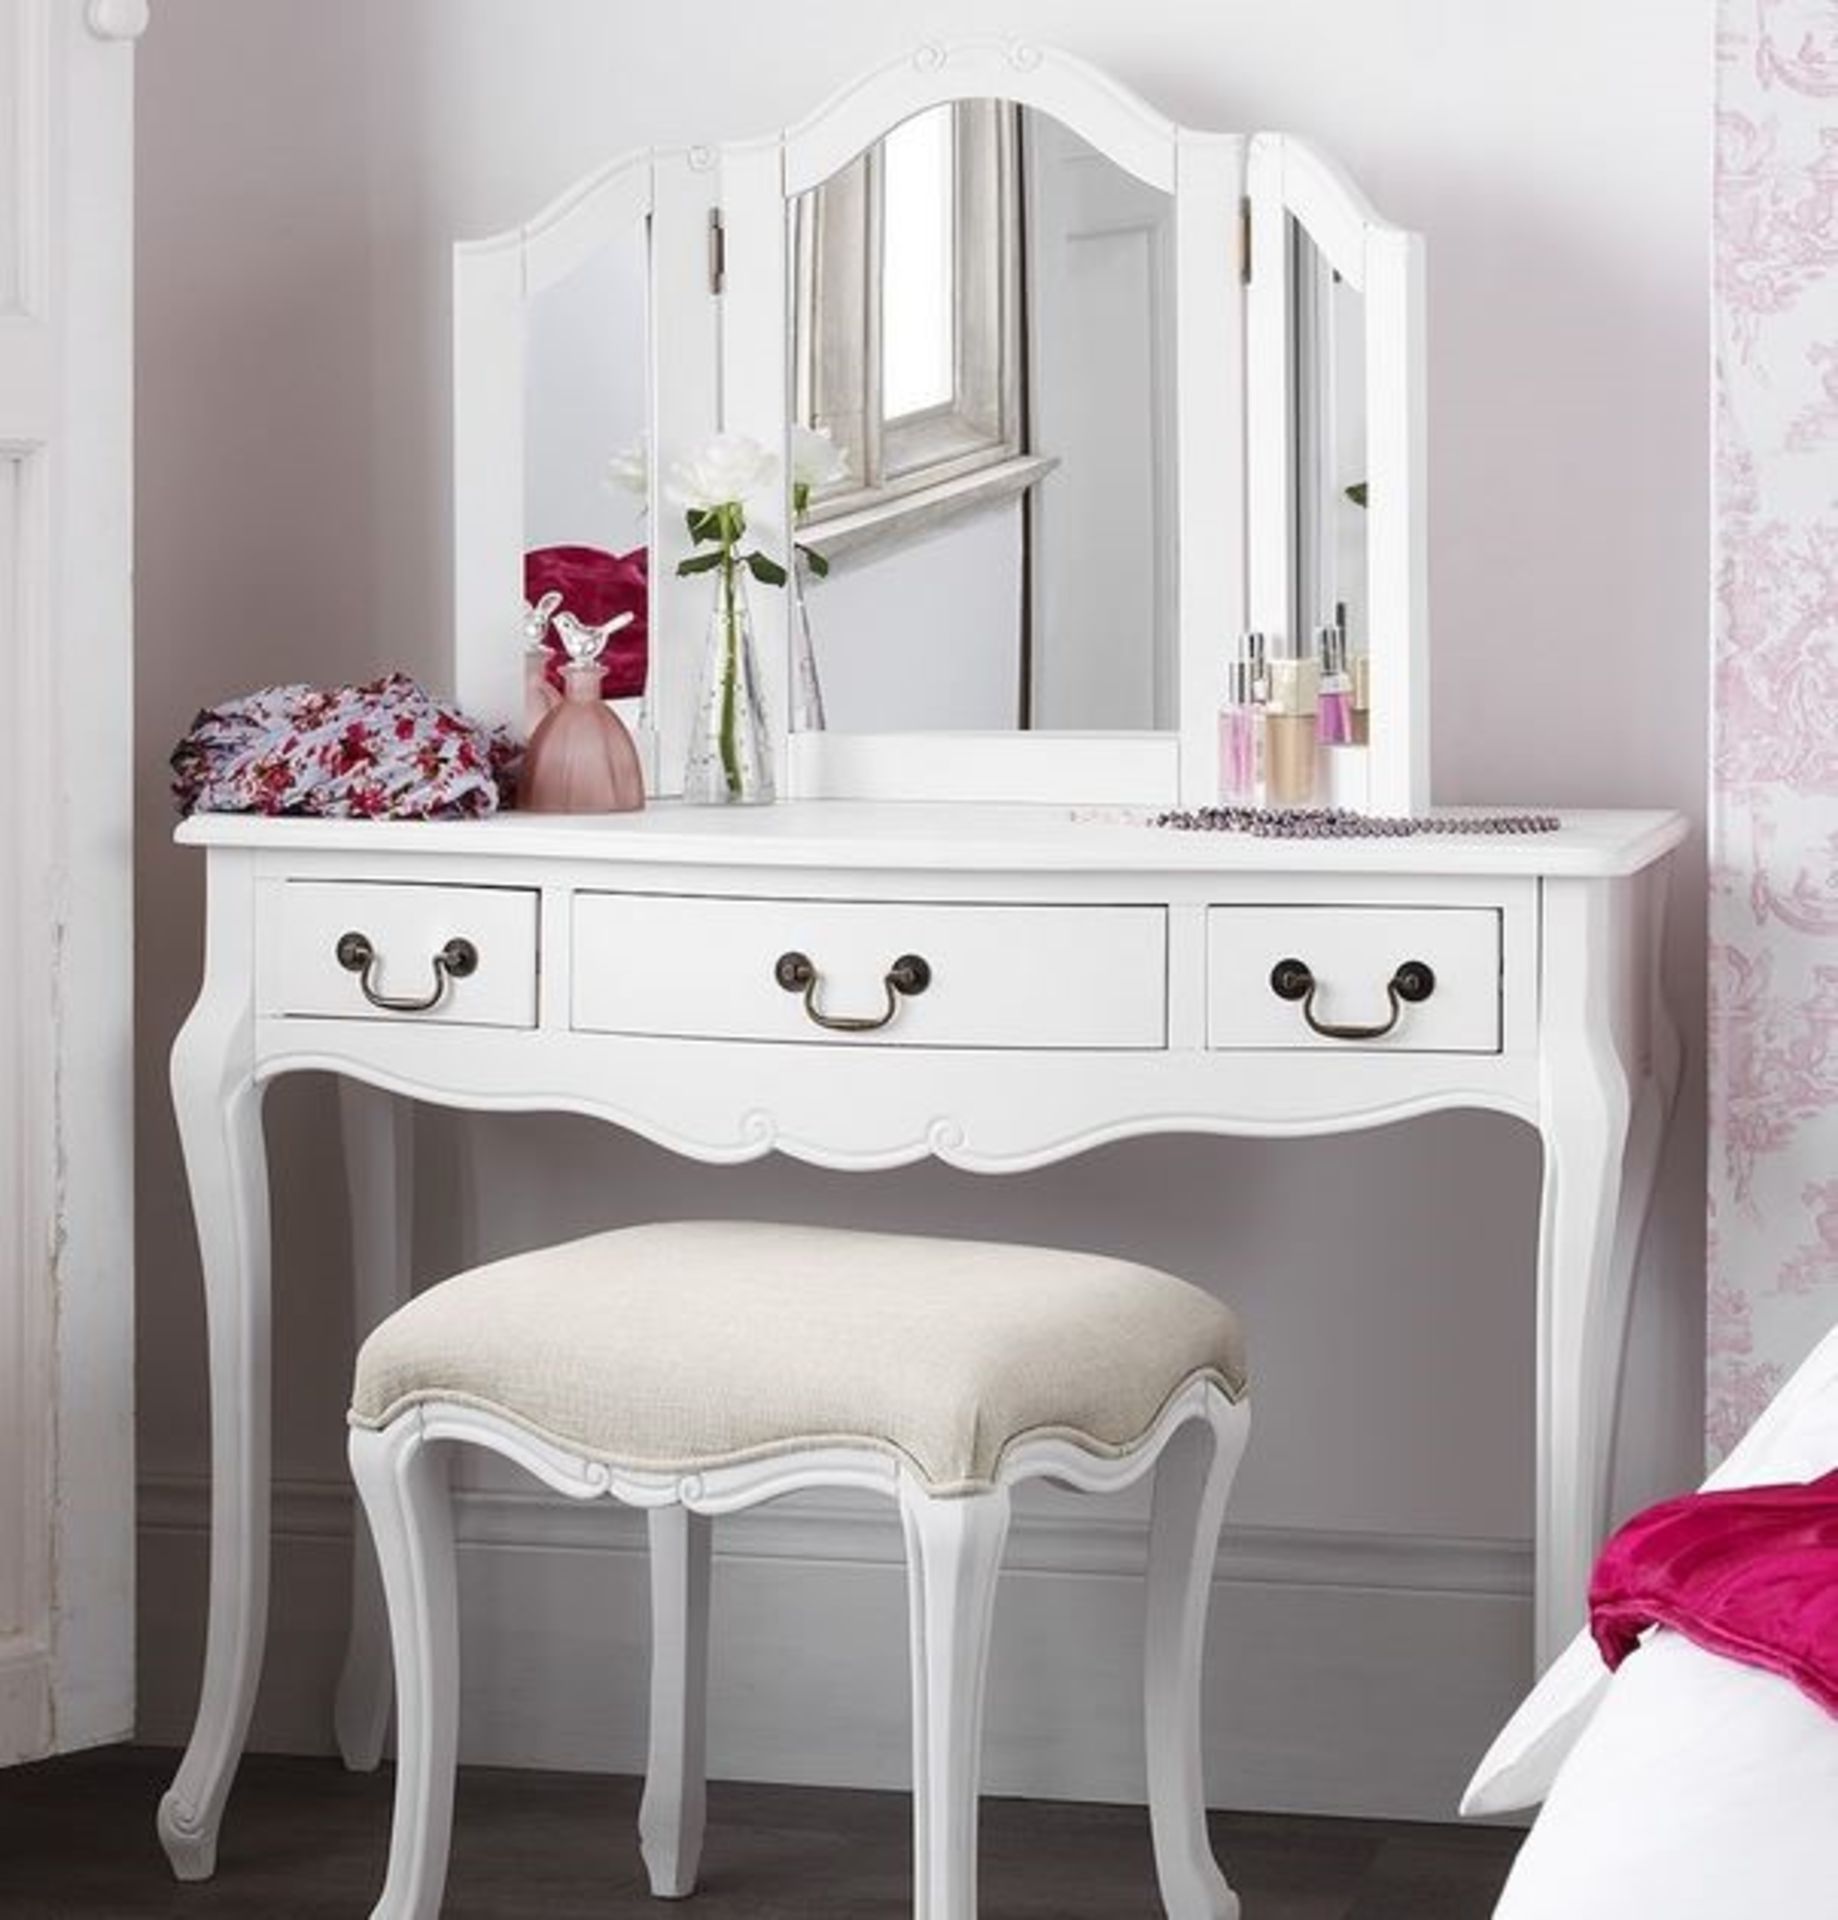 1 BOXED JULIETTE SHABBY CHIC WHITE DRESSING TABLE IN WIHTE - DRESSING TABLE ONLY / RRP £214.99 (